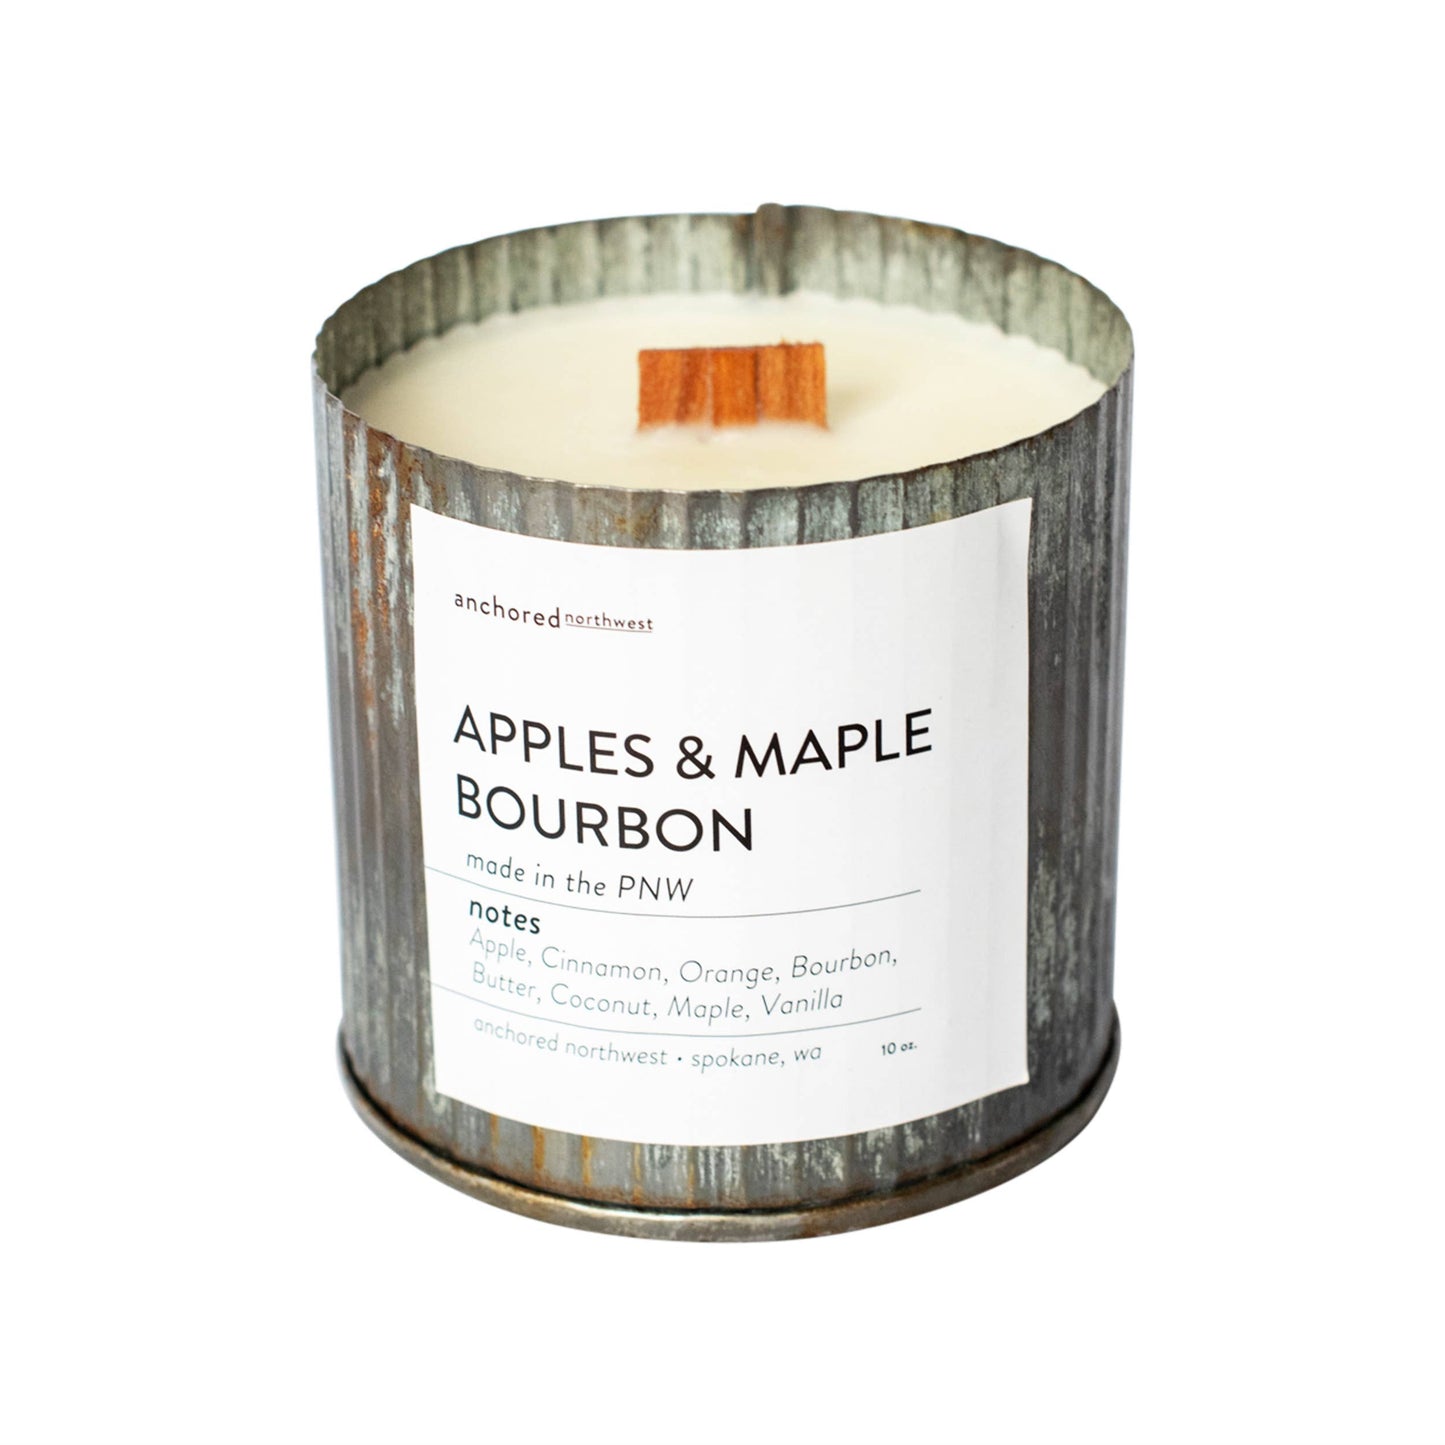 Apples & Maple Bourbon Wood Wick Rustic Farmhouse Soy Candle